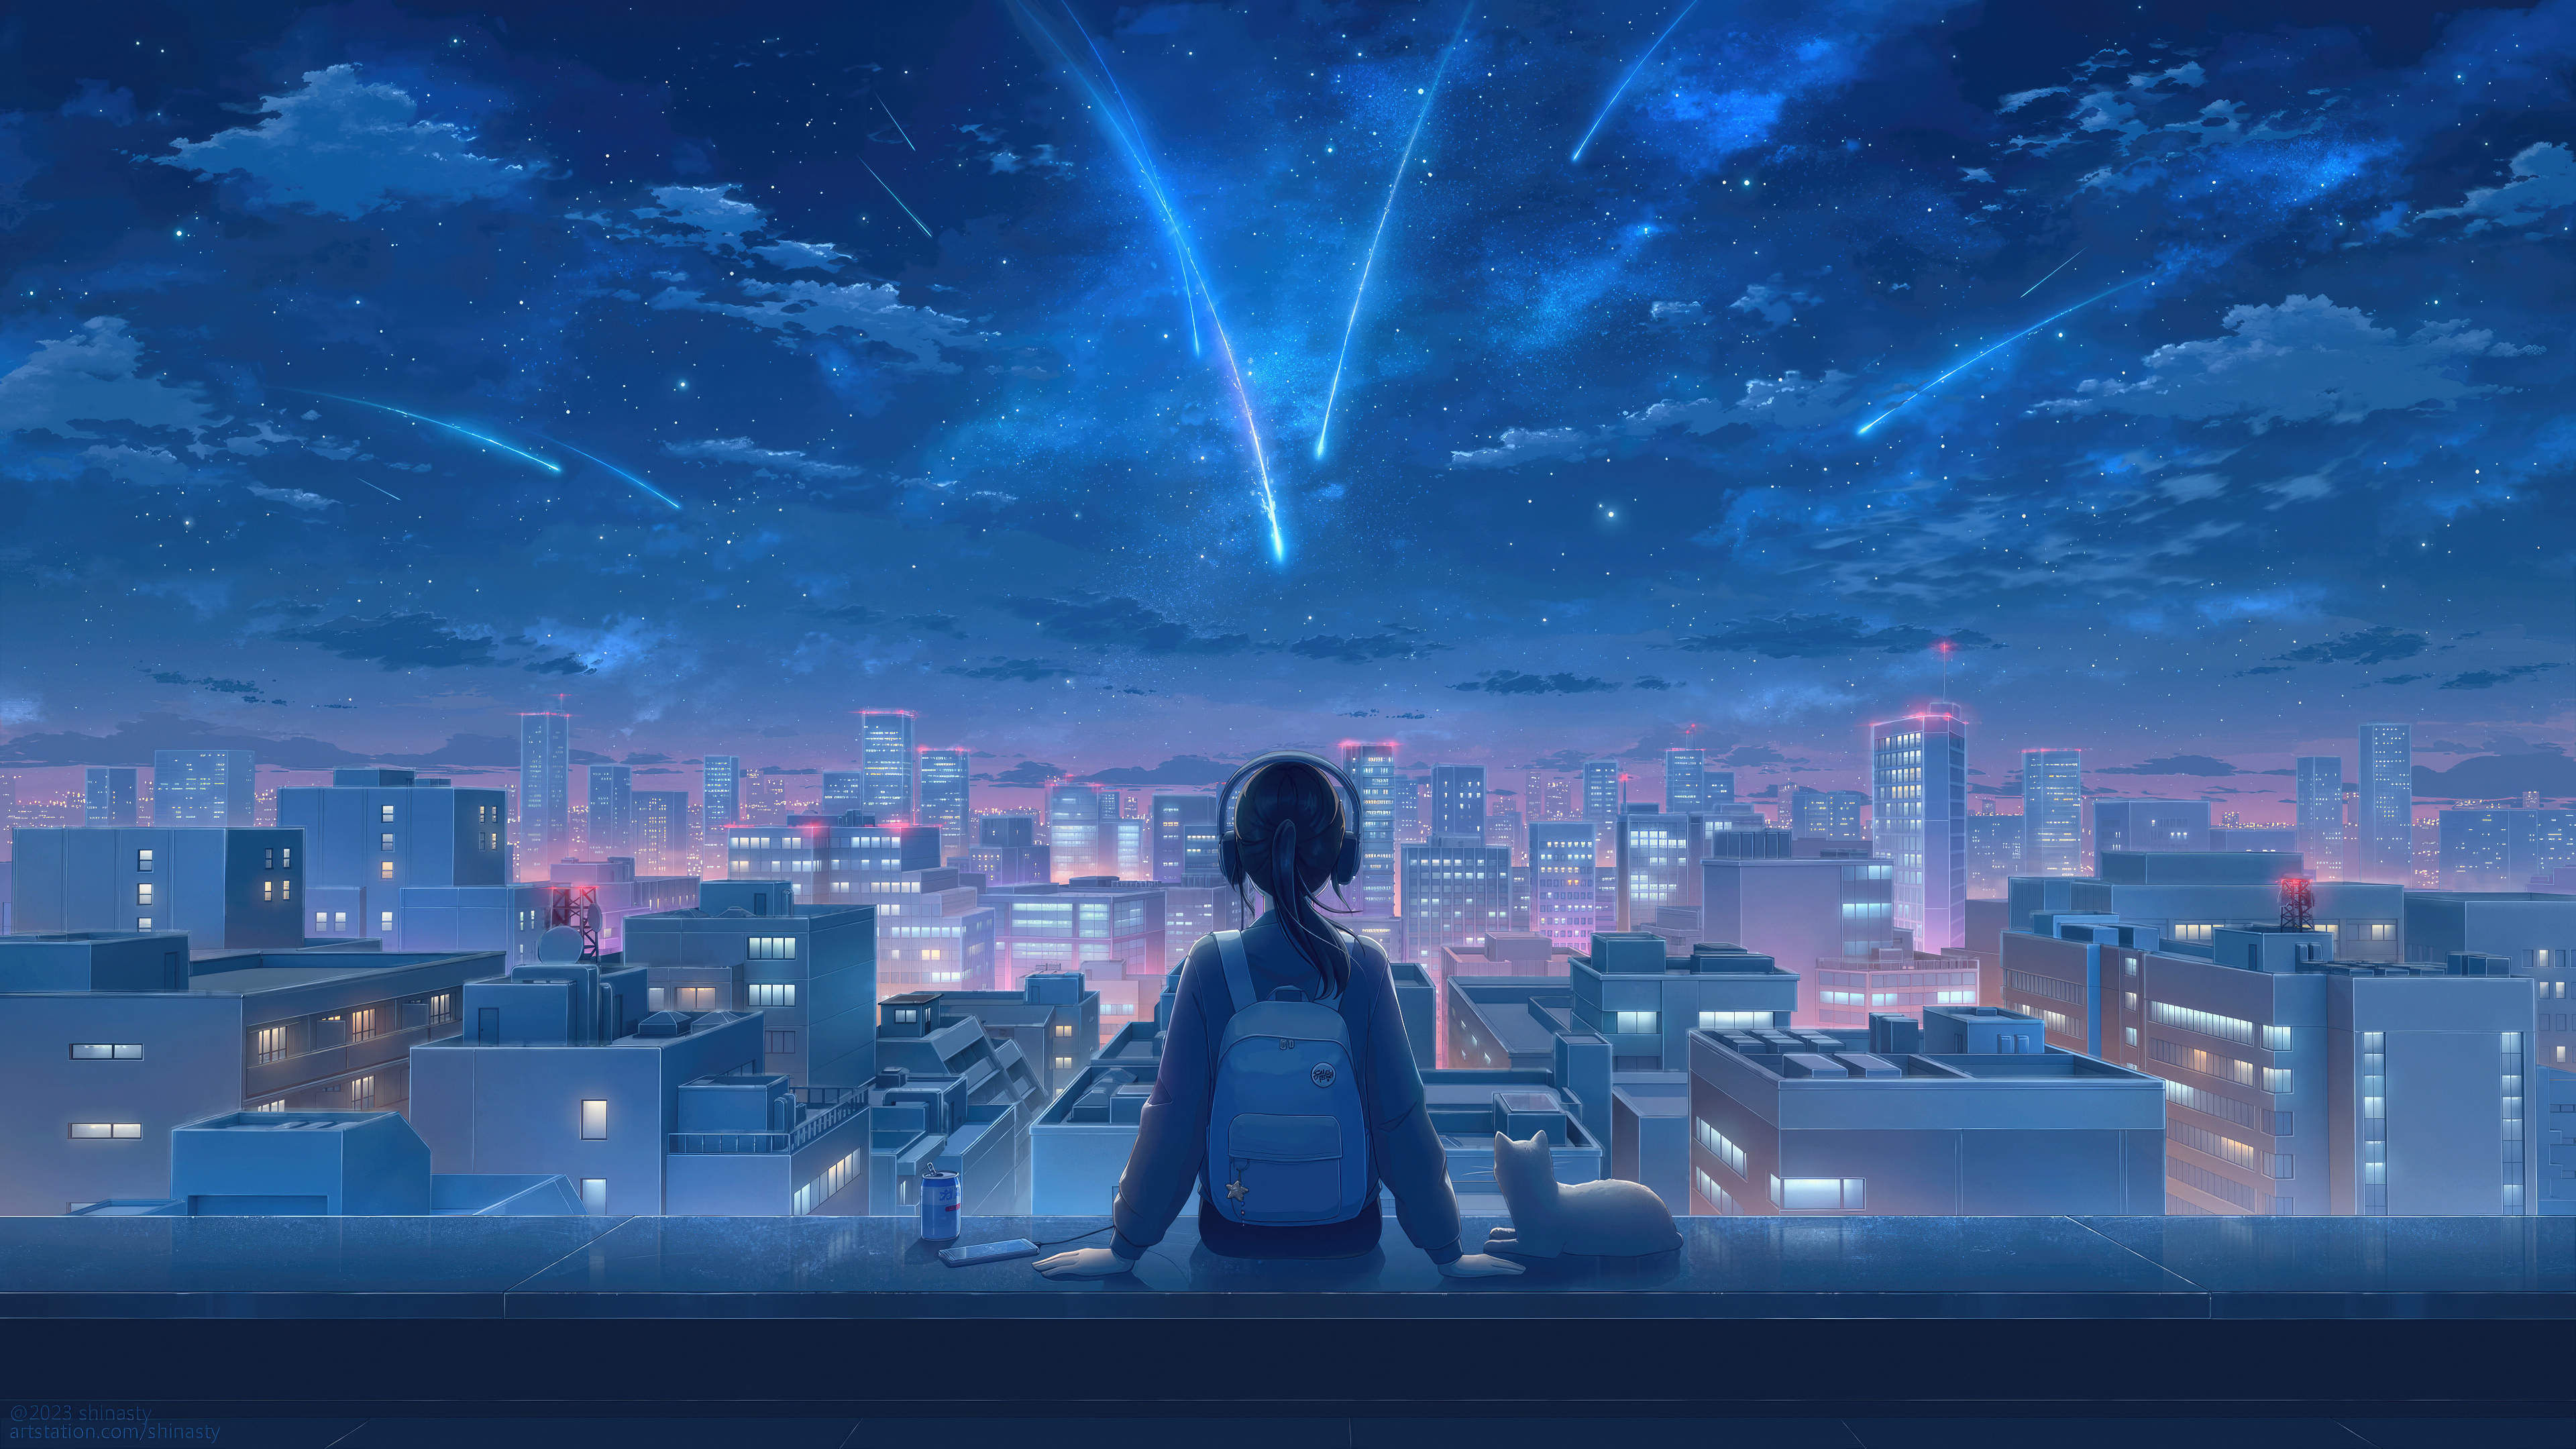 Download A blue anime aesthetic desktop wallpaper to brighten up your day.  Wallpaper | Wallpapers.com